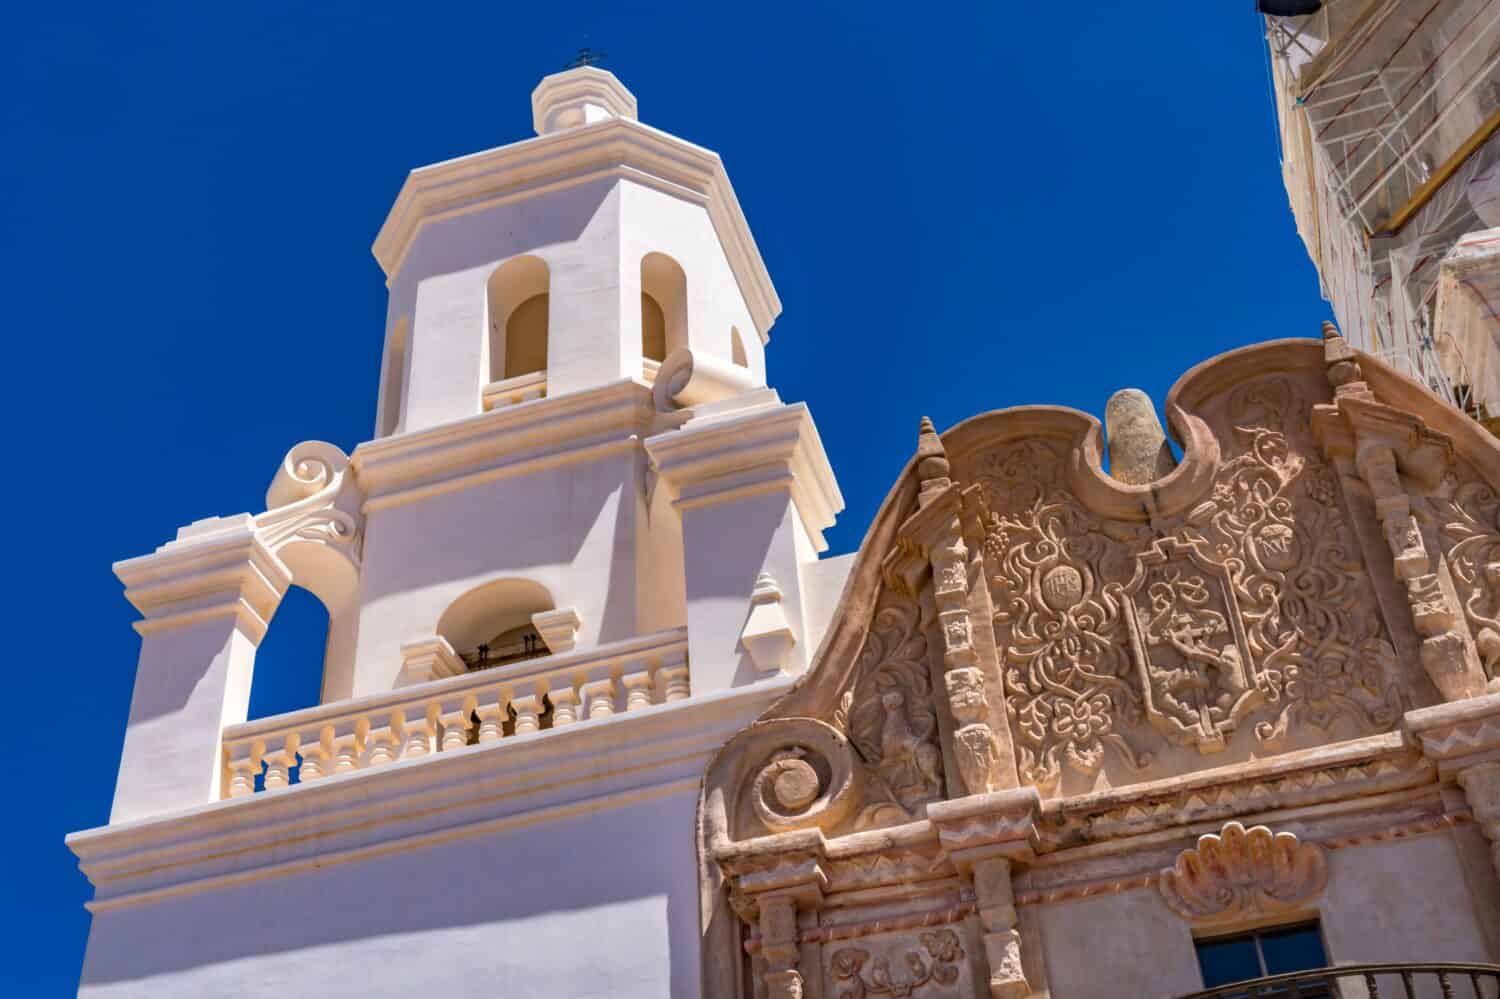 Front Tower Belfry Mission San Xavier del Bac Catholic Church Tuscon Arizona Founded 1692 Best Example Spanish Colonial architecture